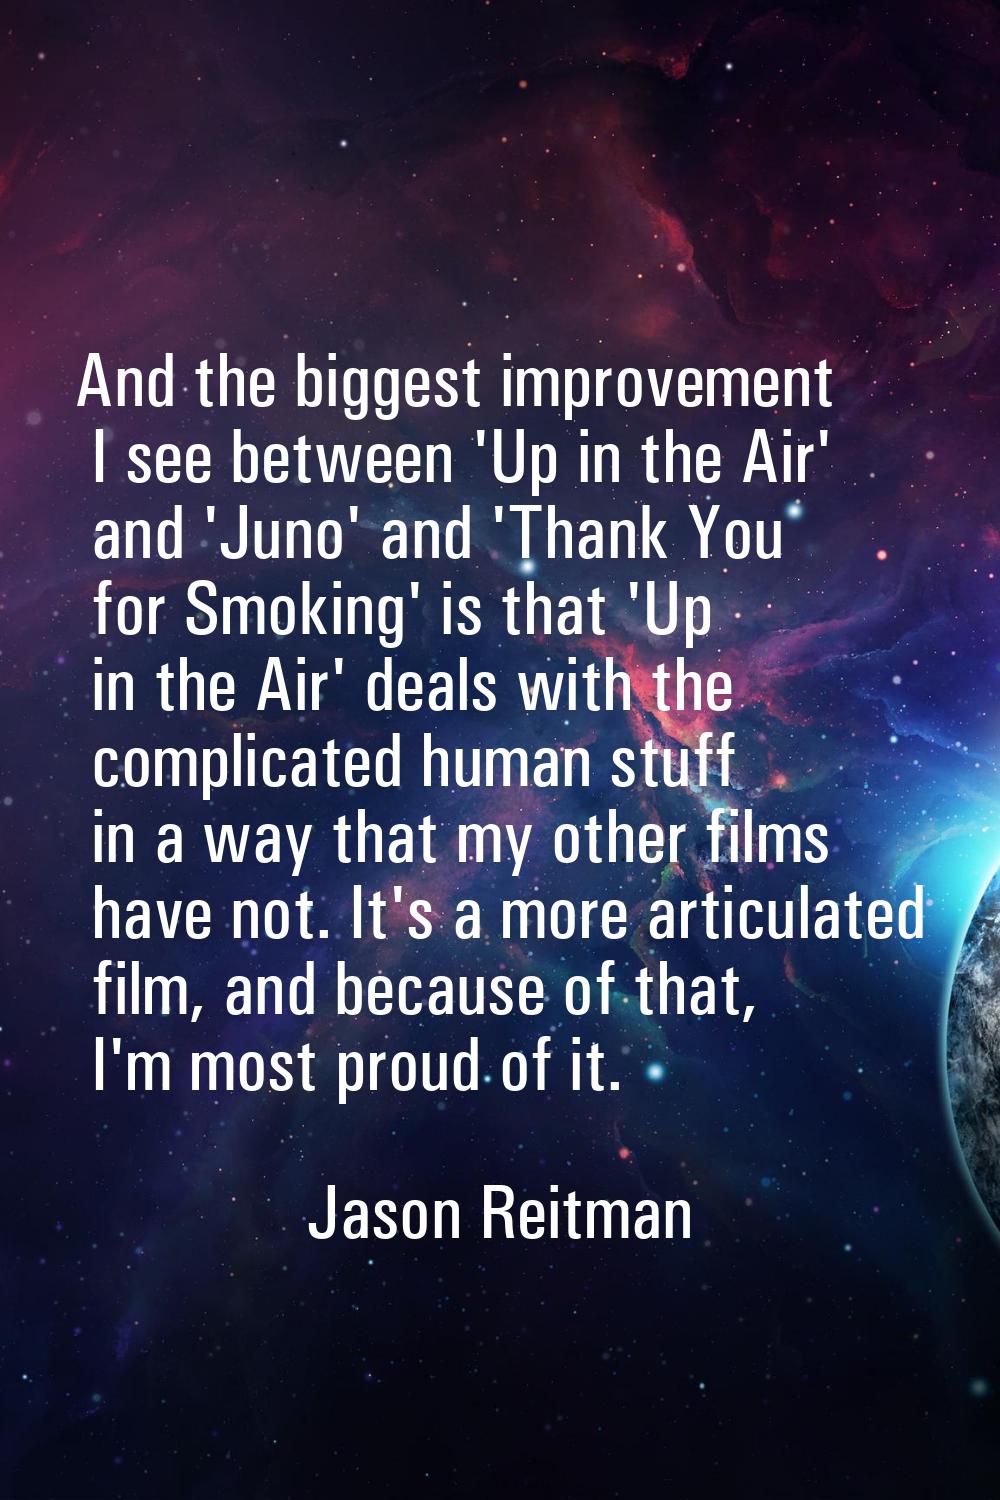 And the biggest improvement I see between 'Up in the Air' and 'Juno' and 'Thank You for Smoking' is